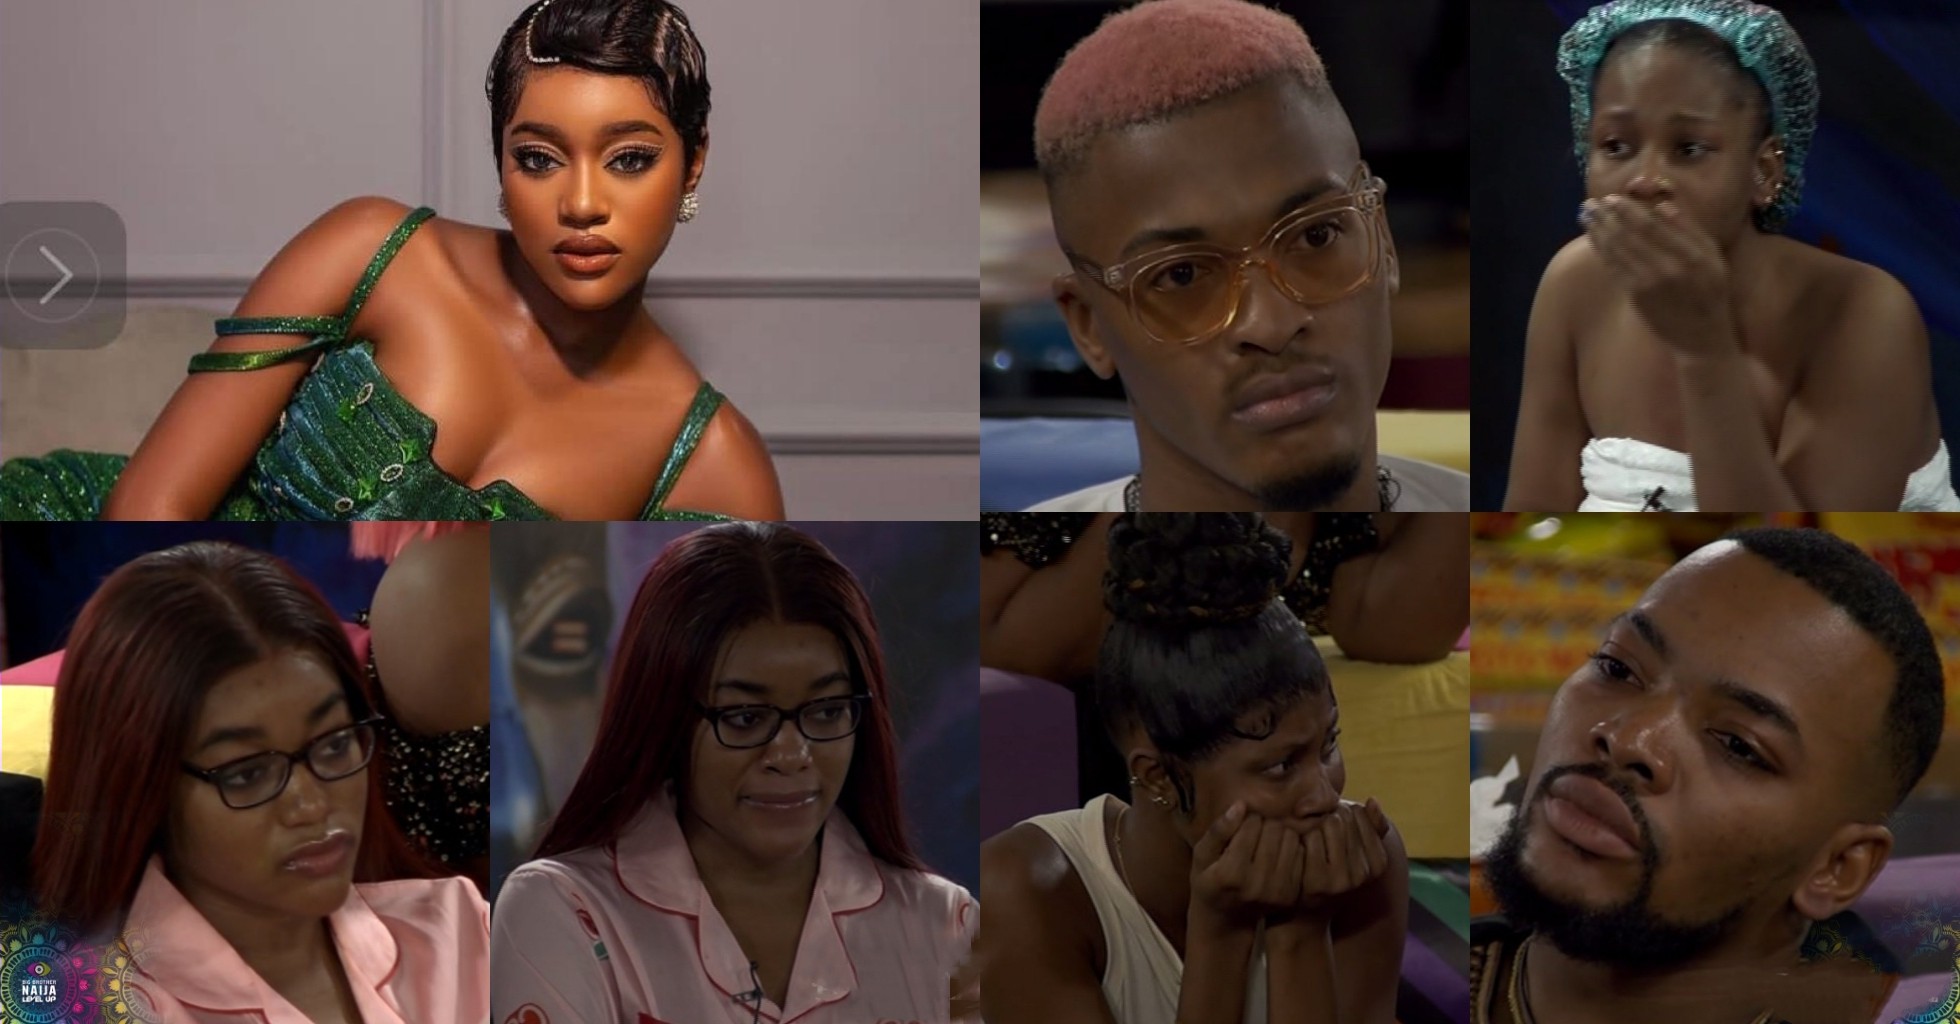 Housemates in tears, shocked to their bones as Beauty gets disqualified [VIDEO]